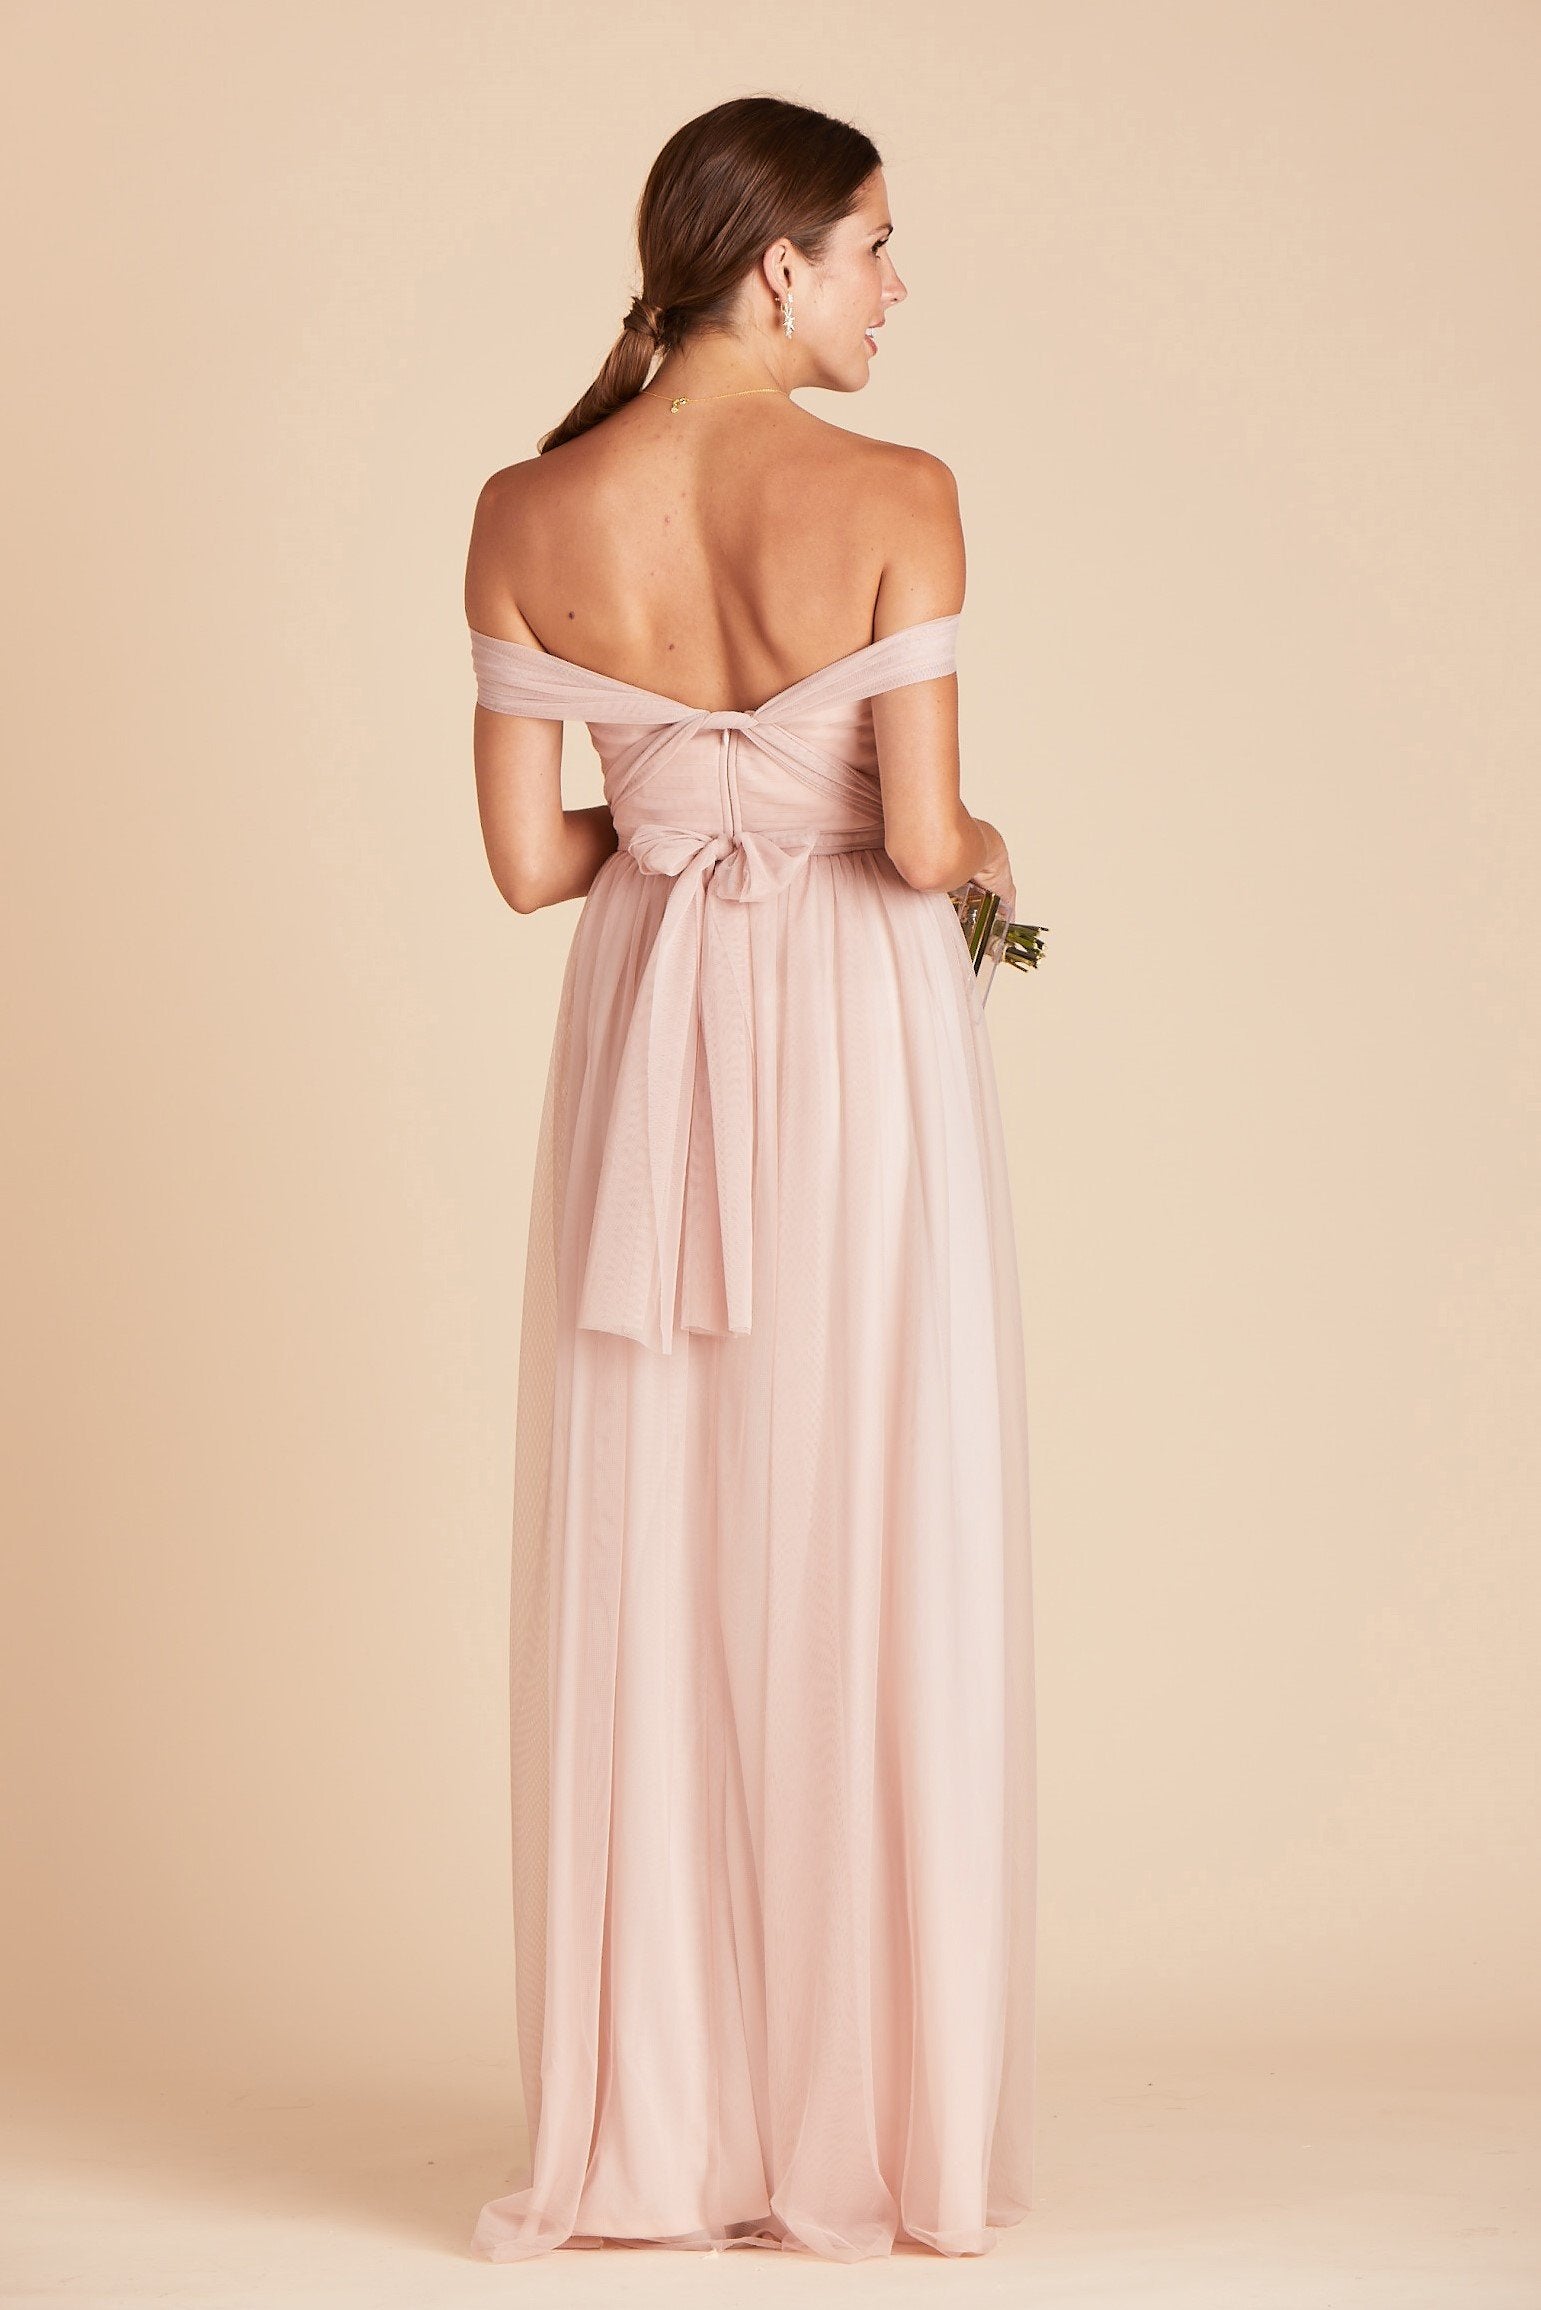 Christina convertible bridesmaid dress in vintage blush tulle by Birdy Grey, back view